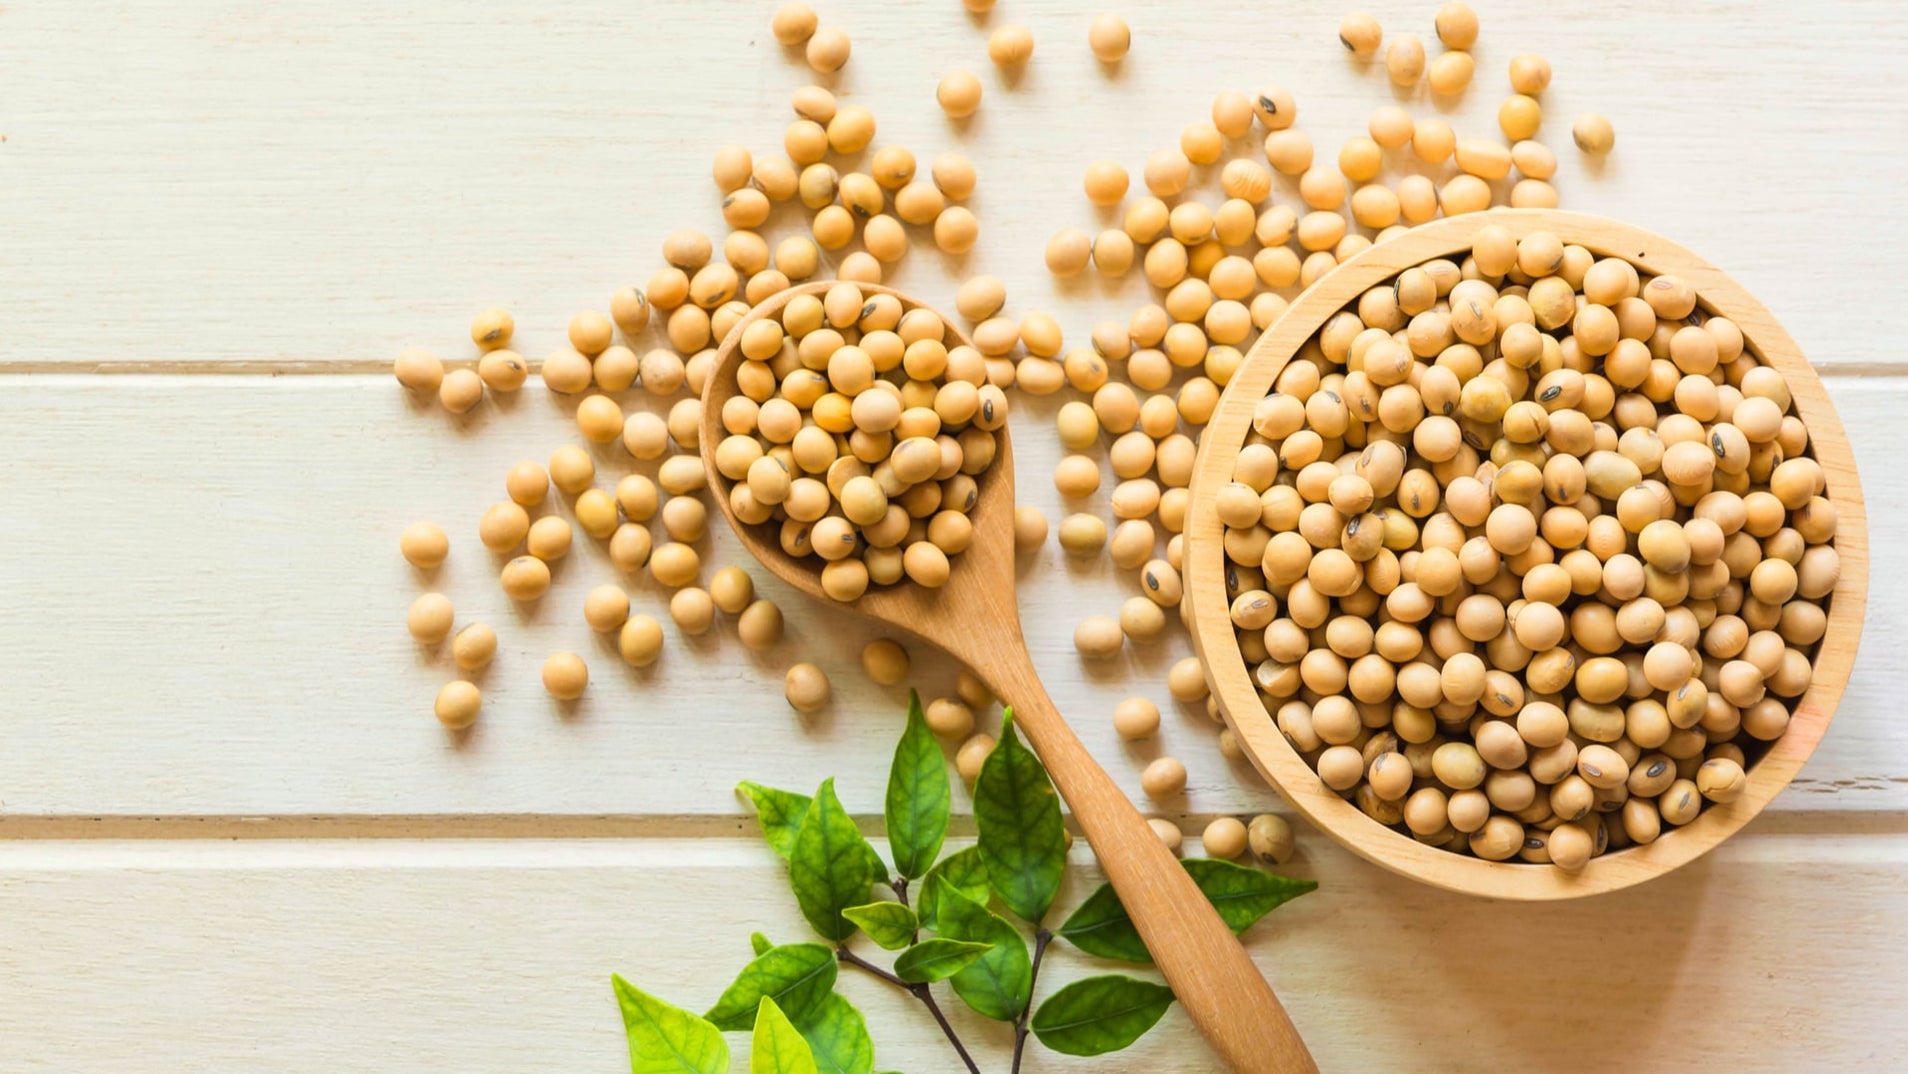 Is Soy Good Or Bad For You? | Wellversed